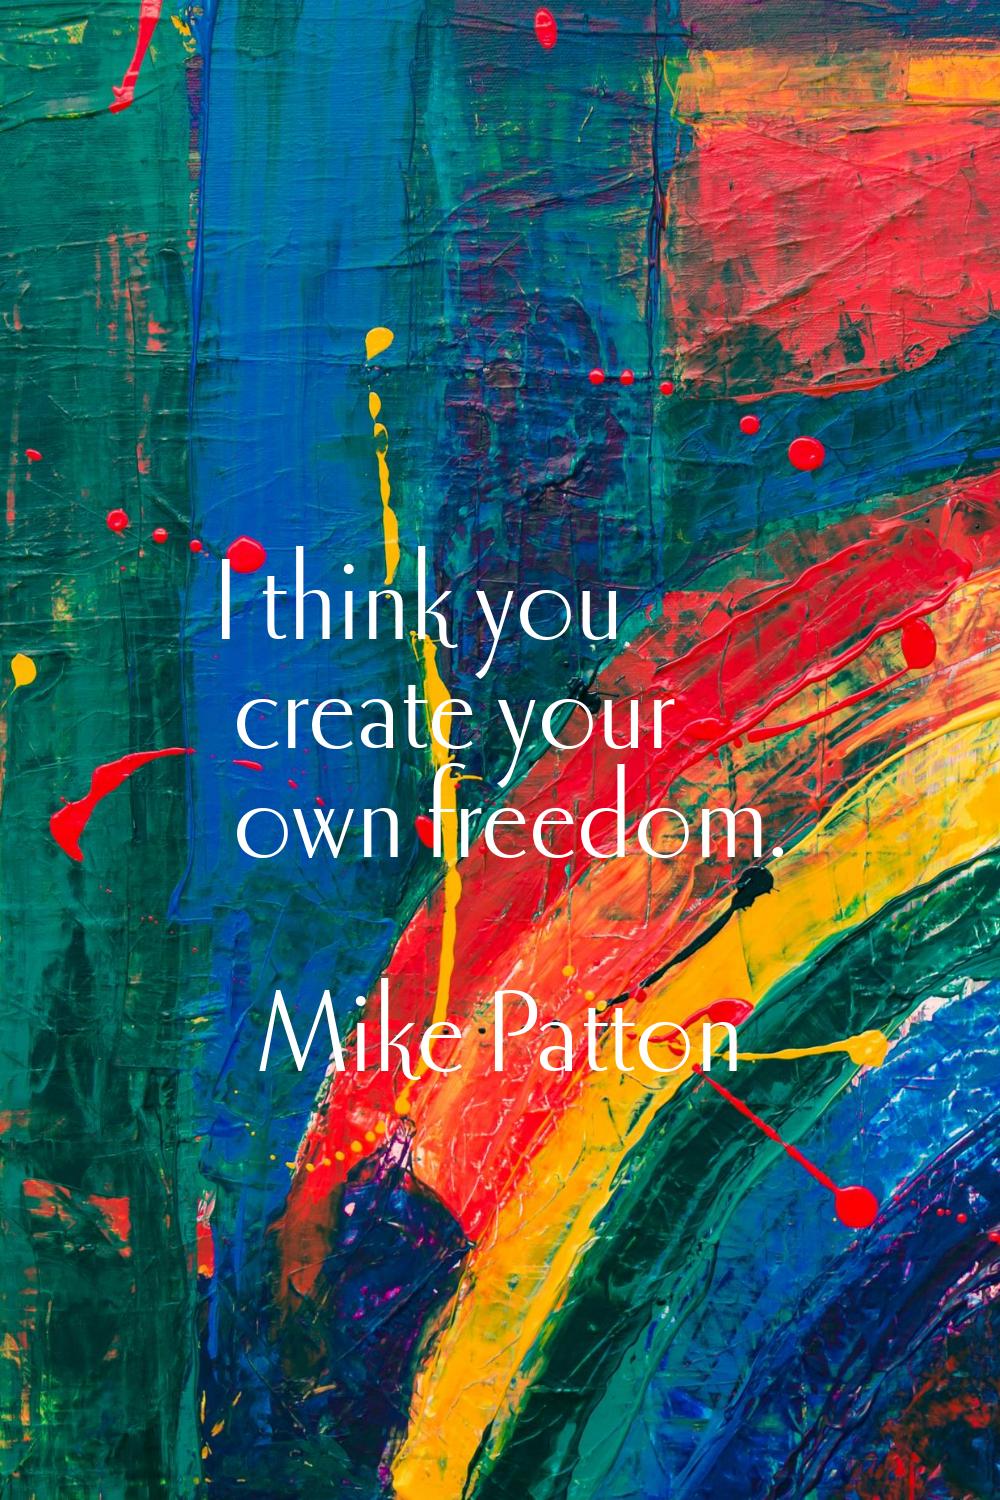 I think you create your own freedom.